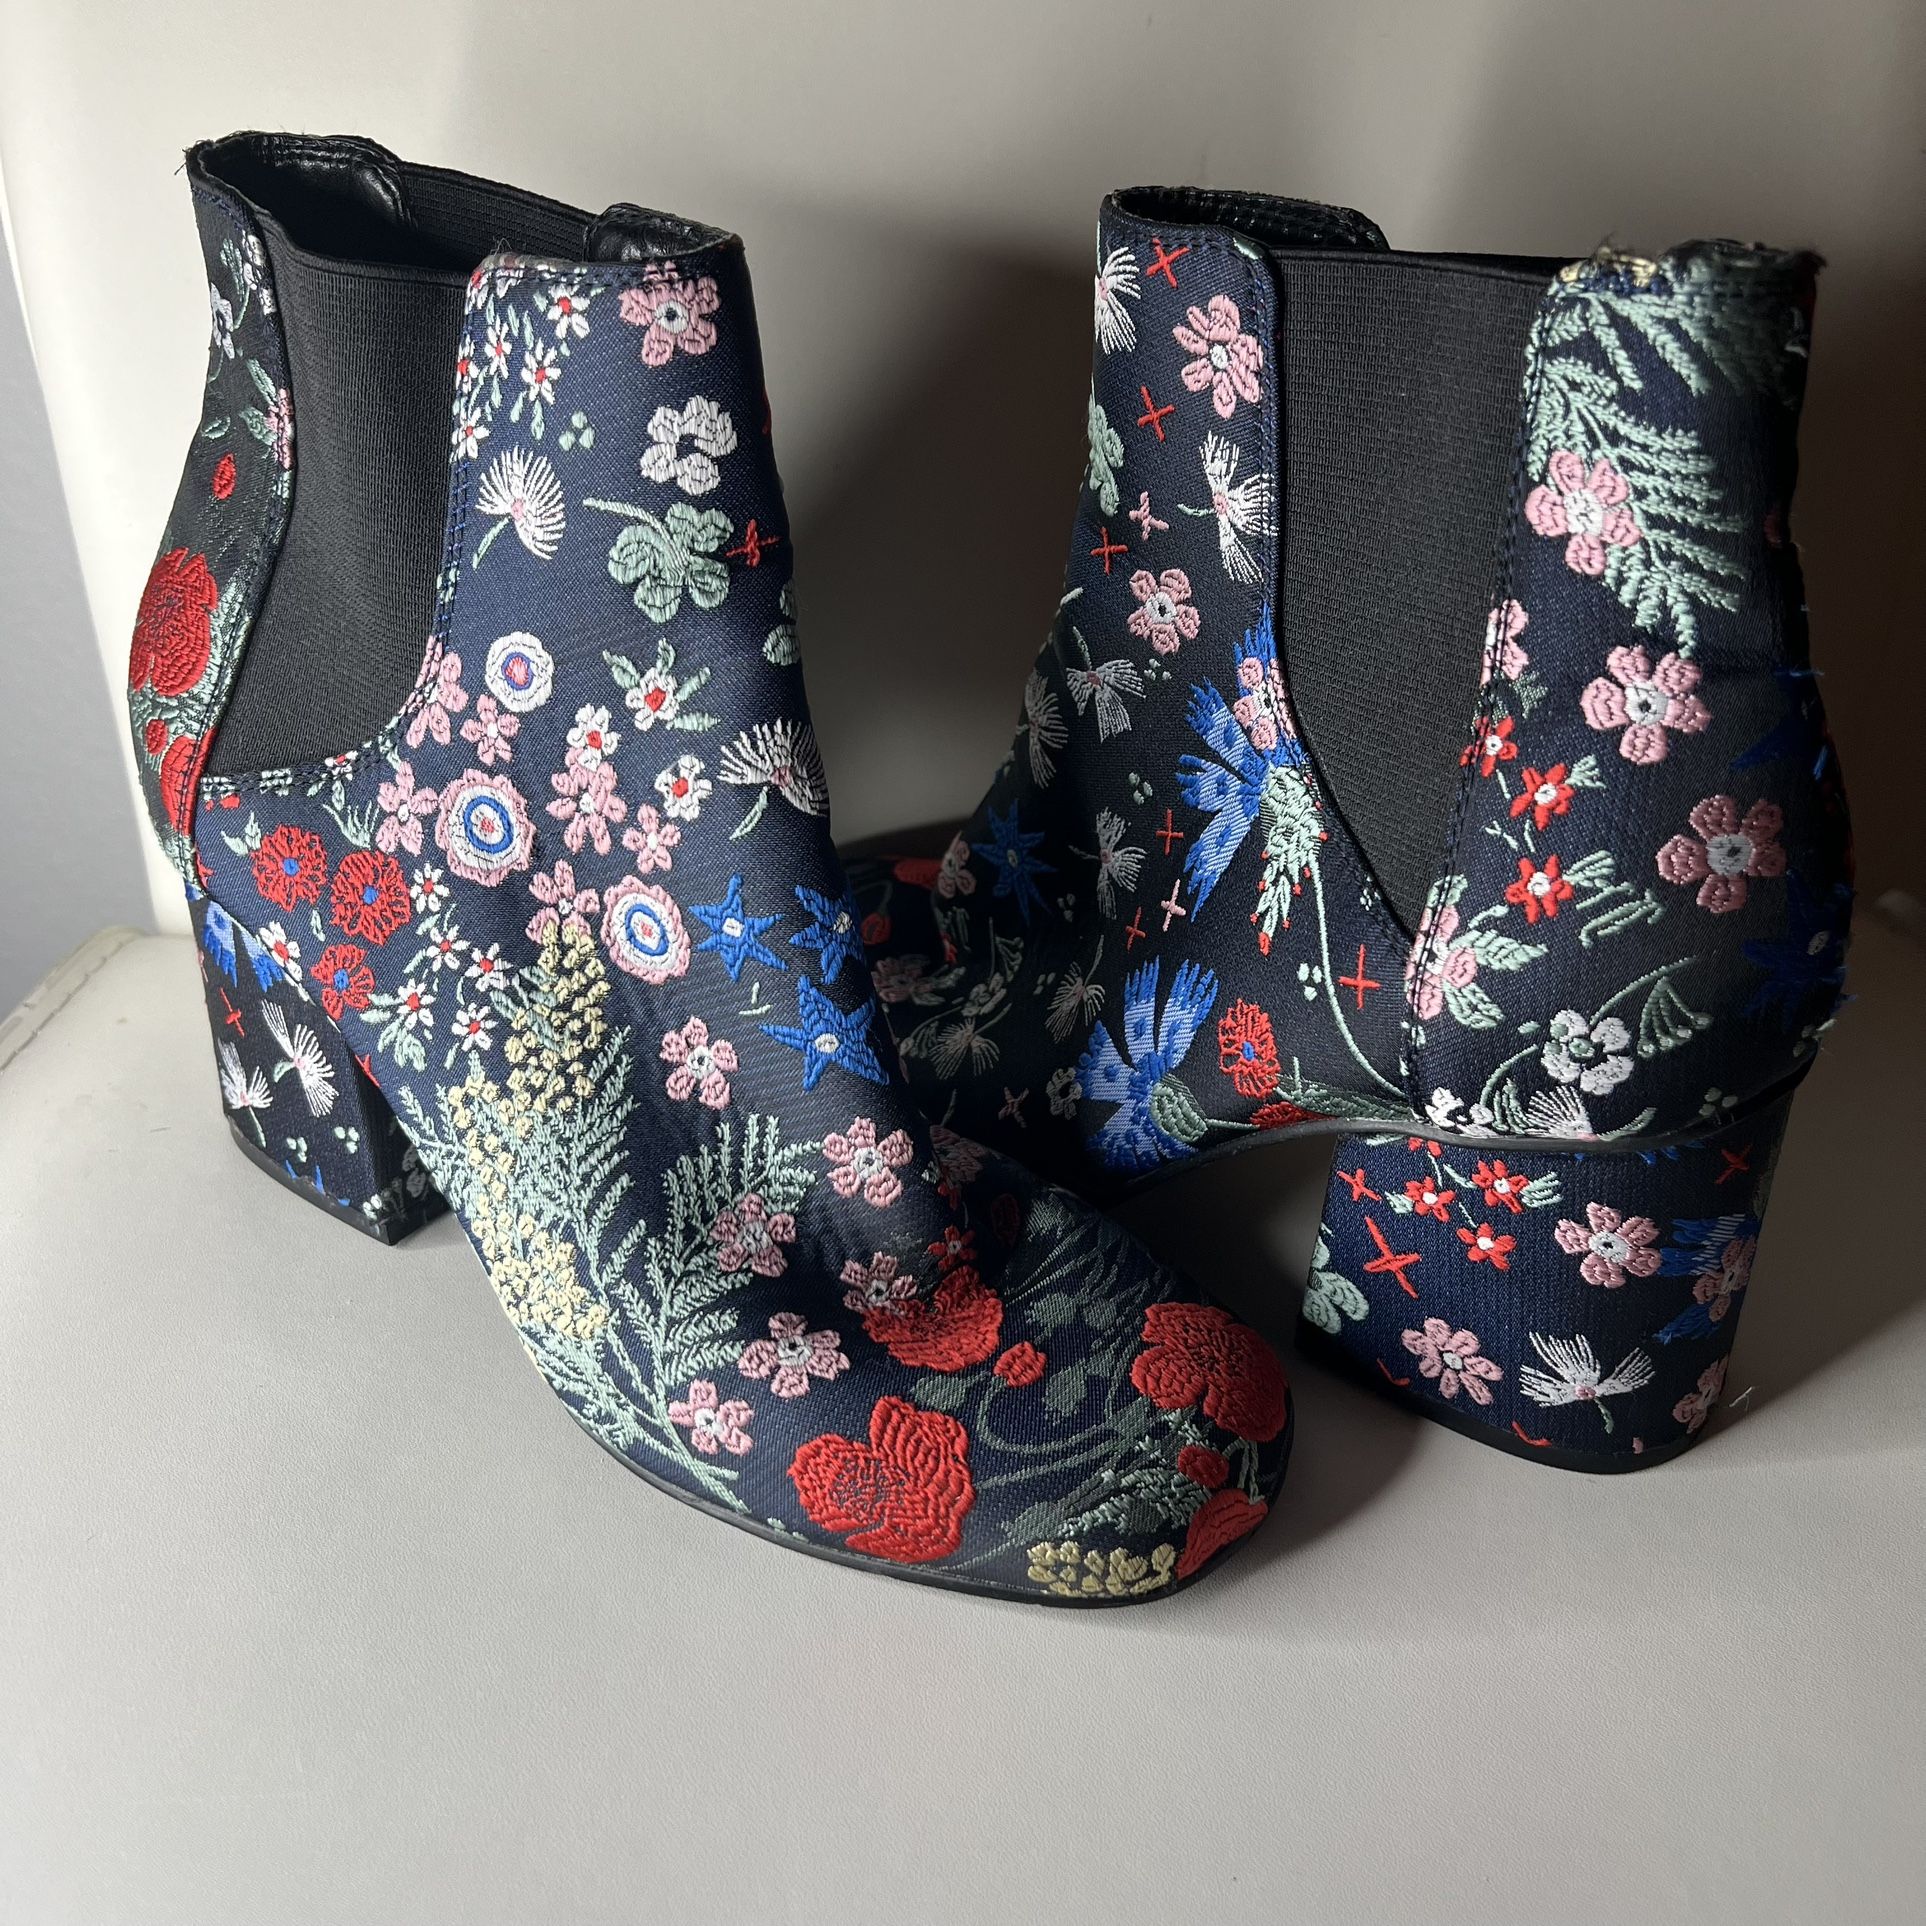 Indigo Rd. Veraly Chelsea Floral Boots Black Embroidered Floral - Size: W7